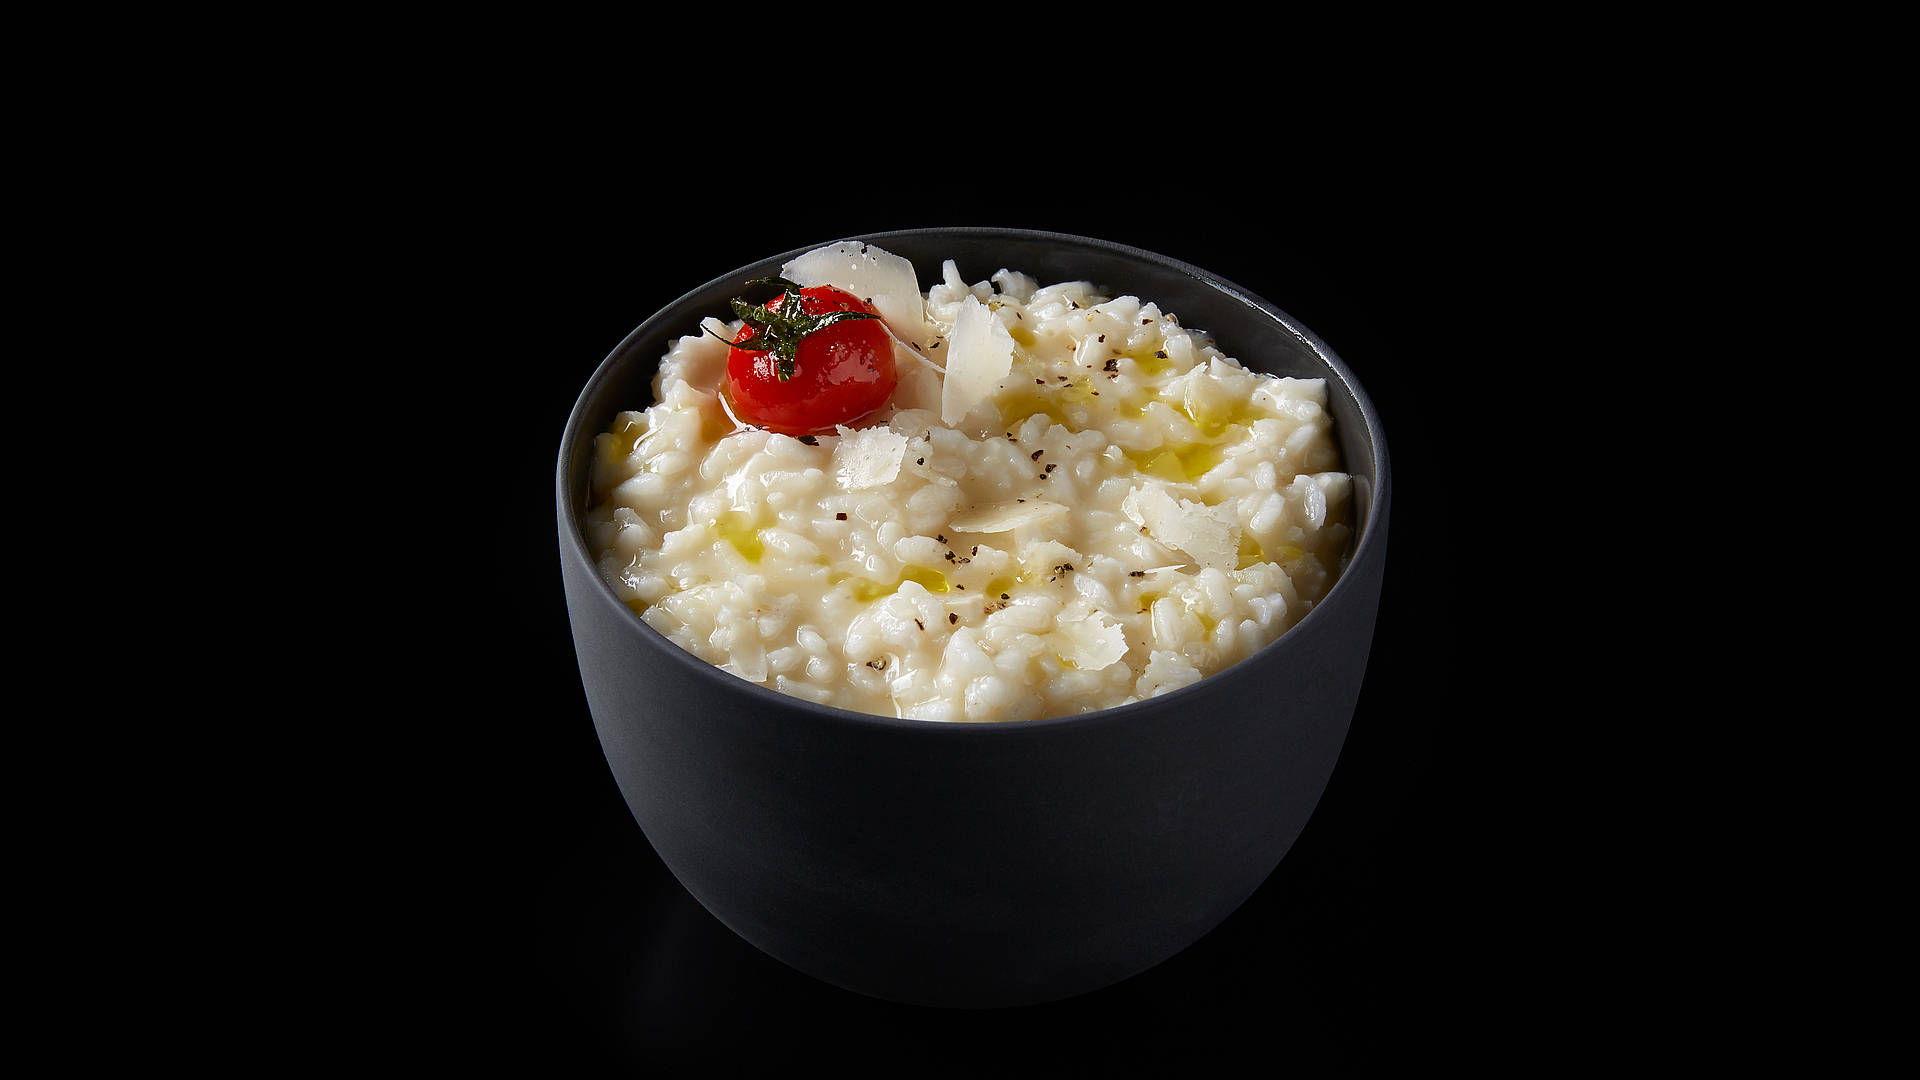 Fresh and Zesty Tomato Risotto Served in a Bowl Wallpaper